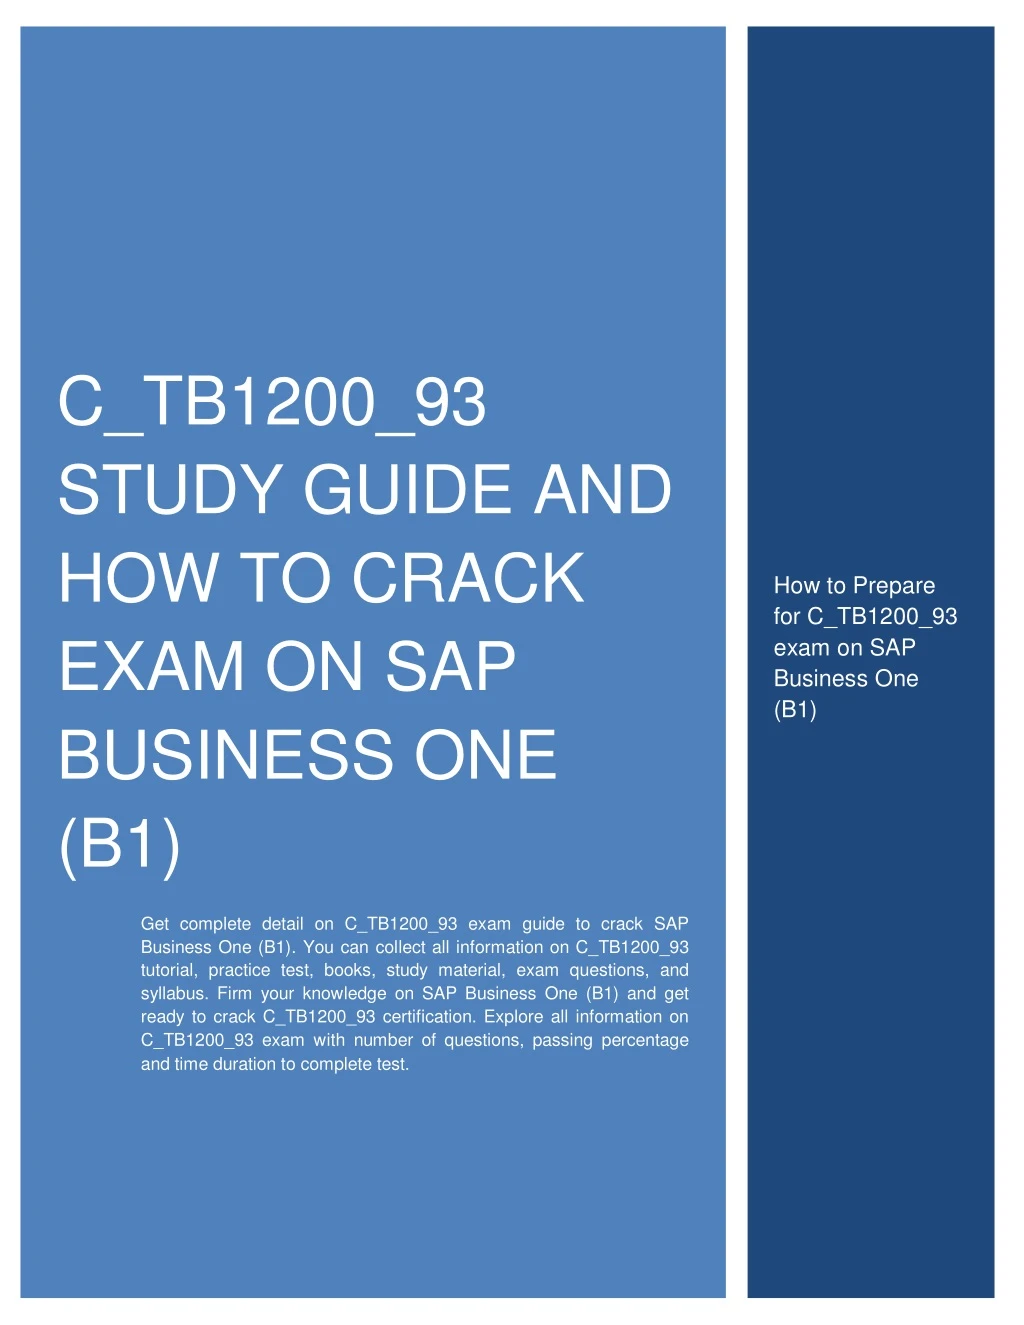 c tb1200 93 study guide and how to crack exam